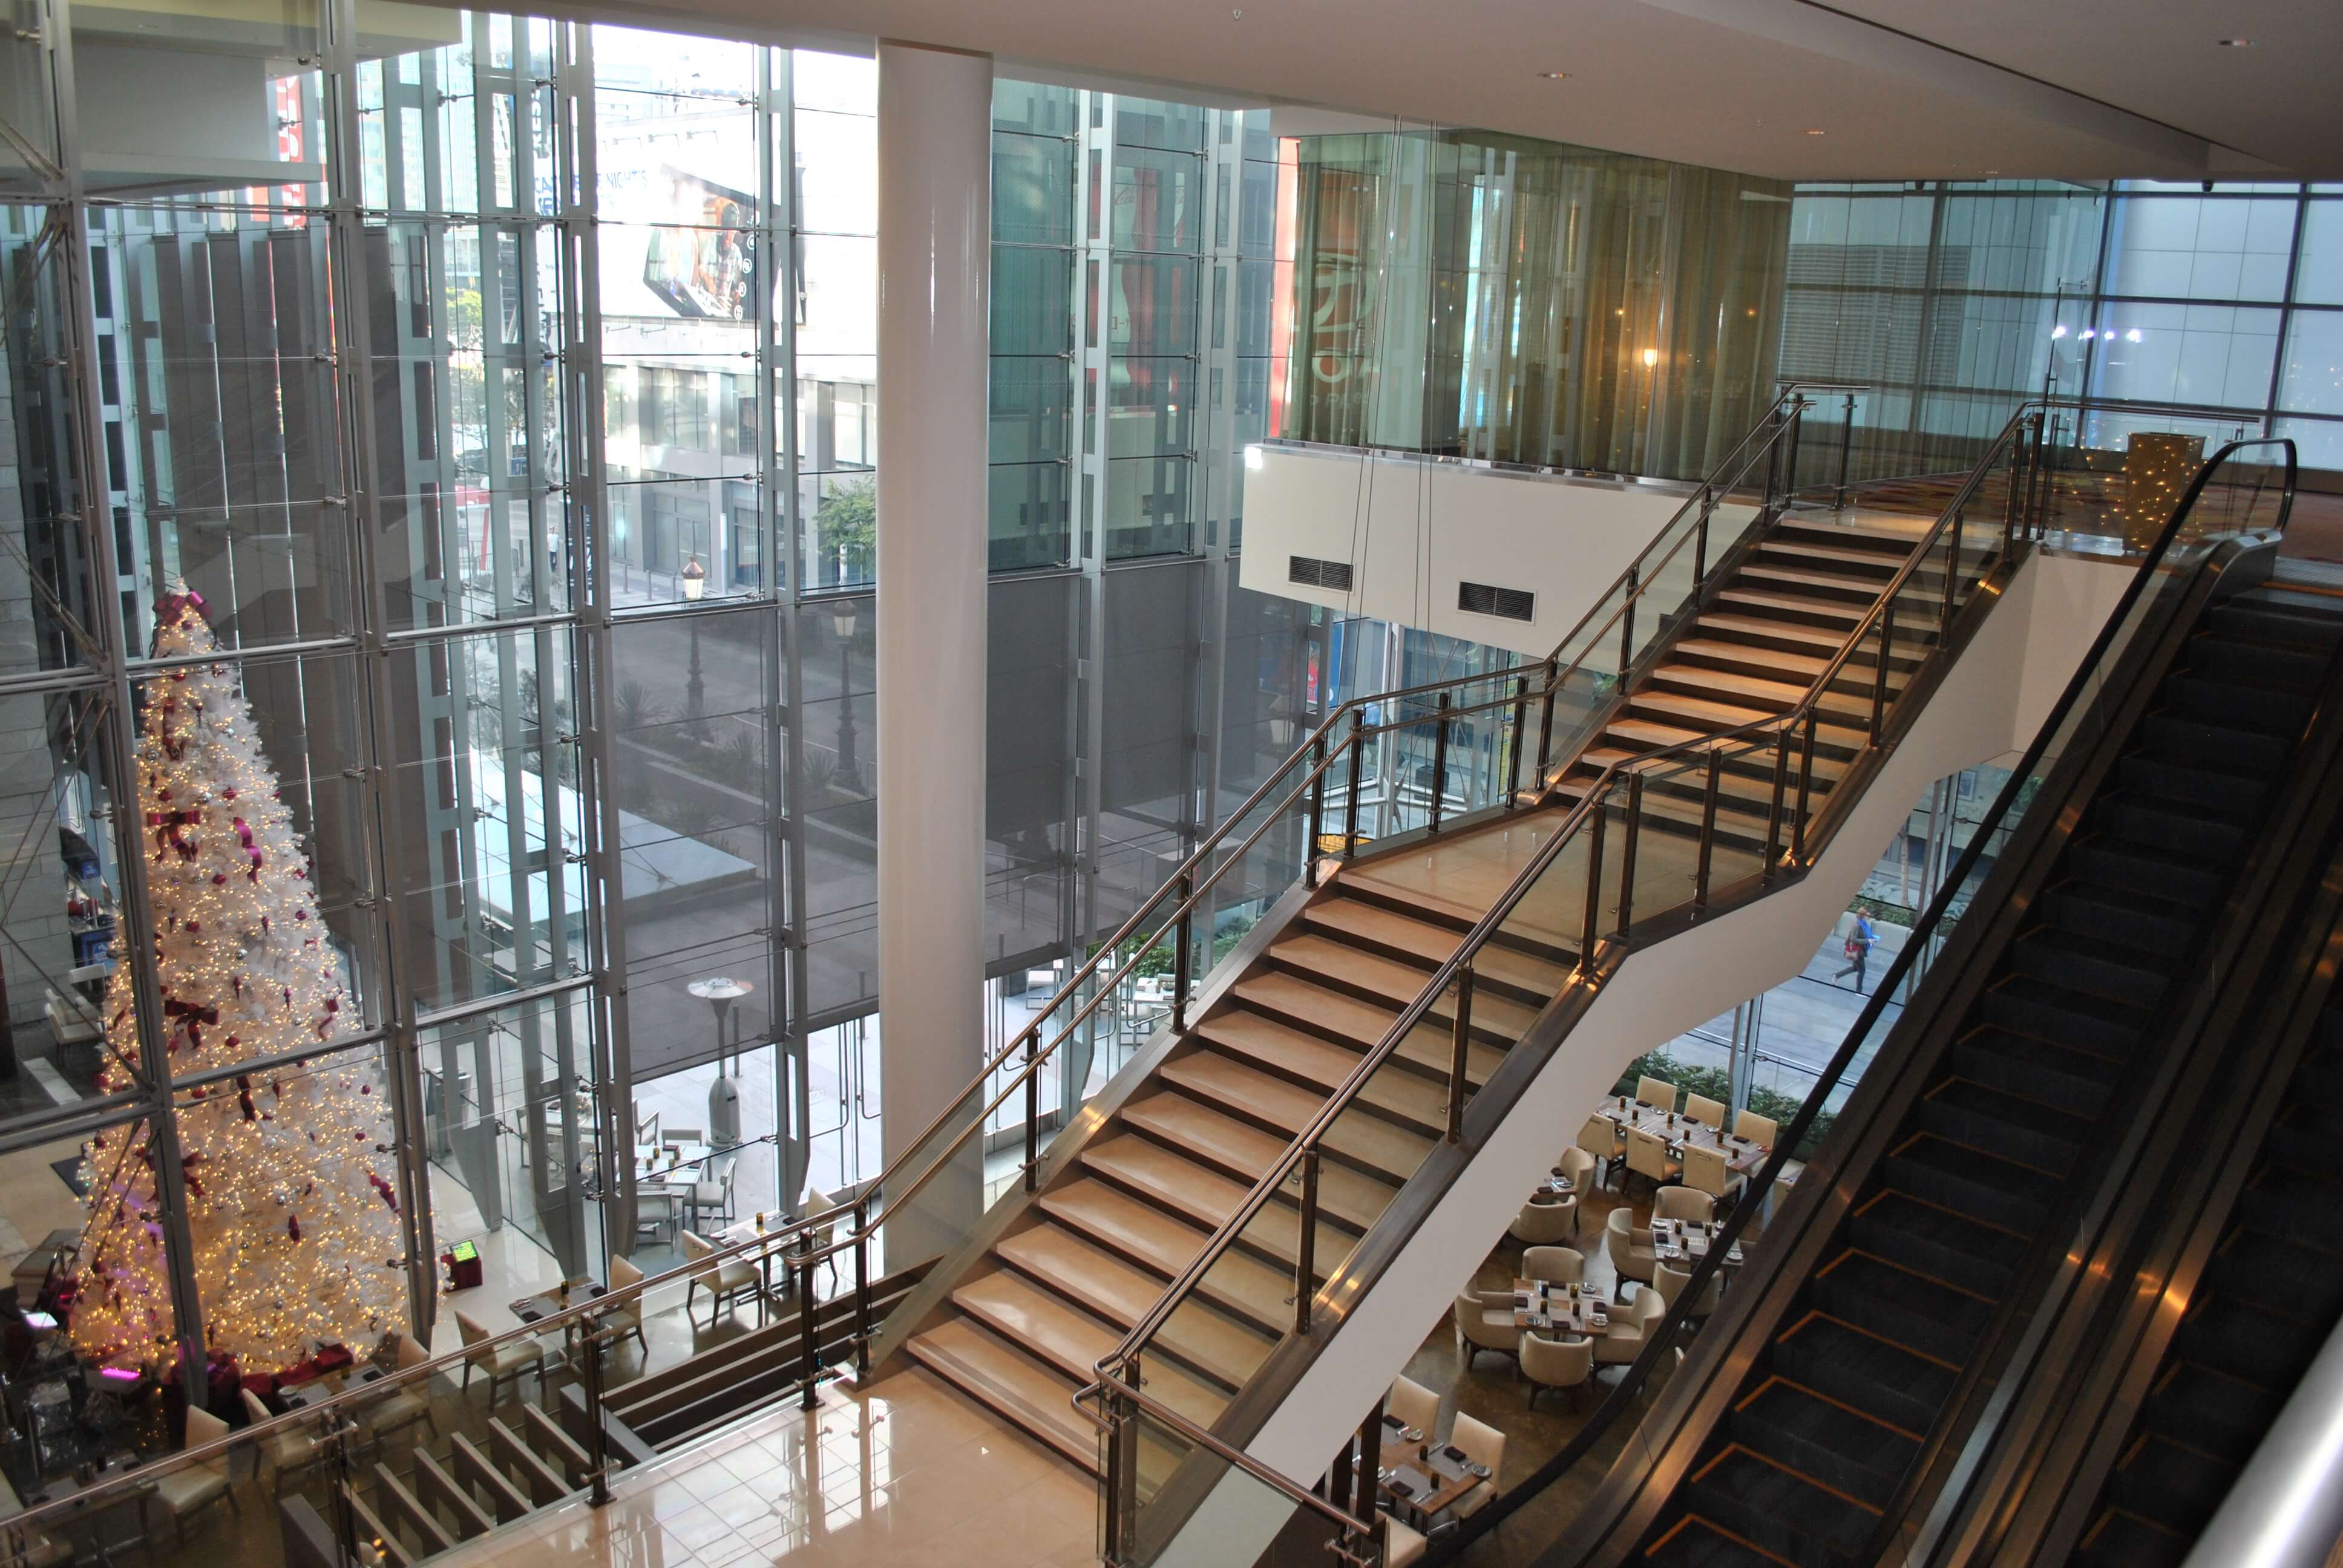 Ferric guardrail with glass infill installation at LA Live Convention Center, CA.